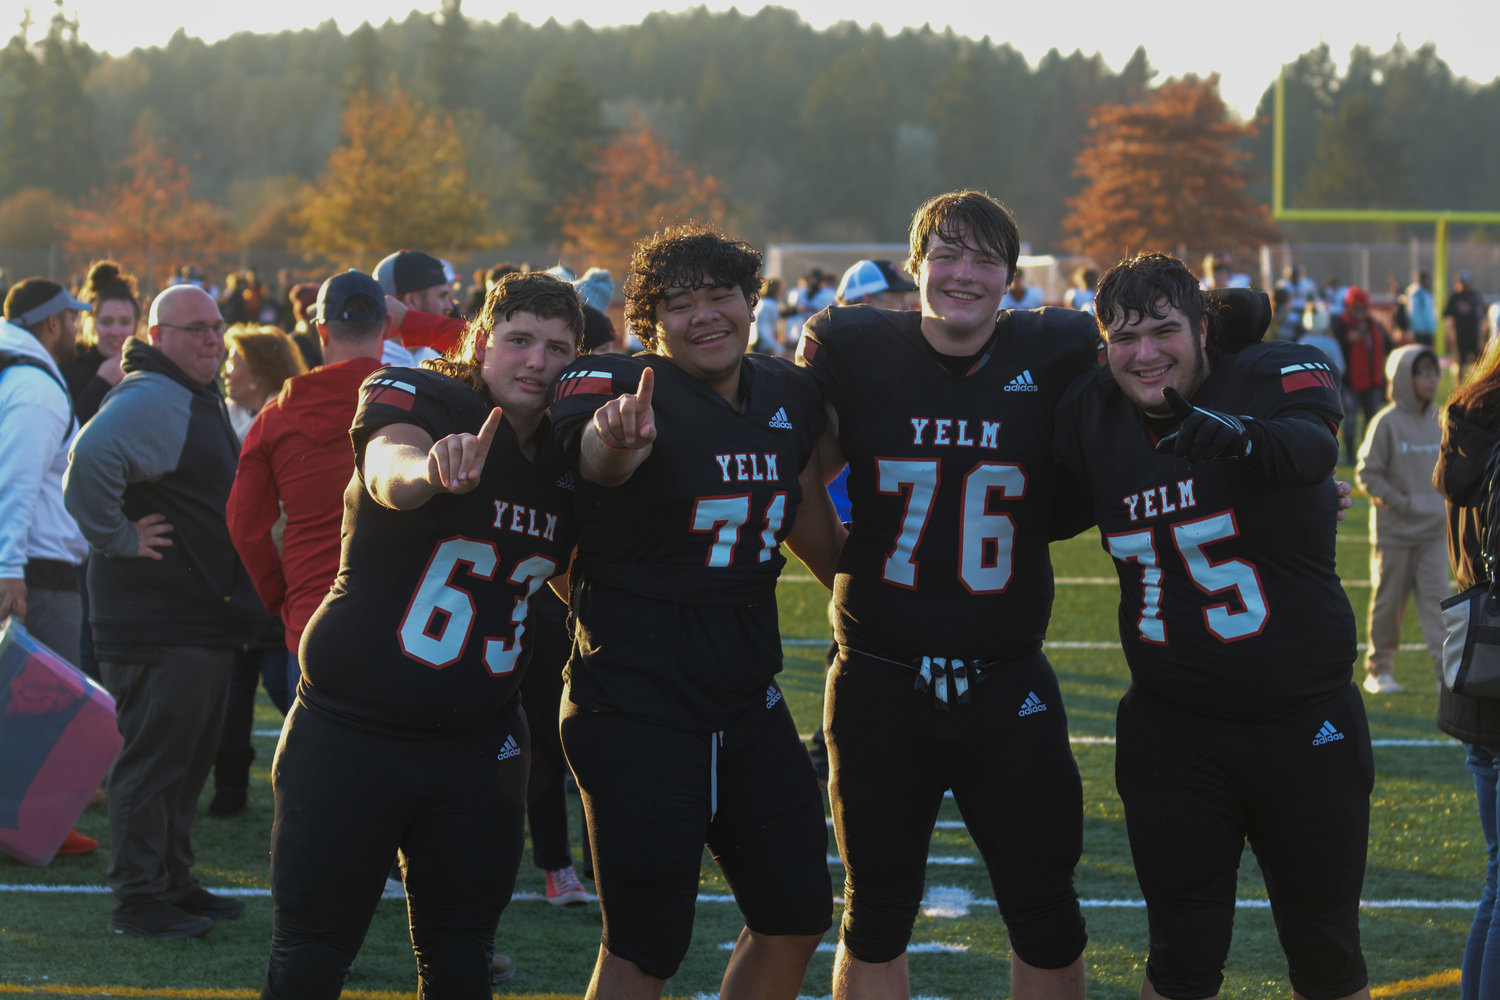 Offensive linemen Jonah Smith (63), Ami Fakava (71), Tyler Blevins (76) and Landen Barger (75) pose for a photo in celebration of their 3A quarterfinal victory on Saturday, Nov. 19.